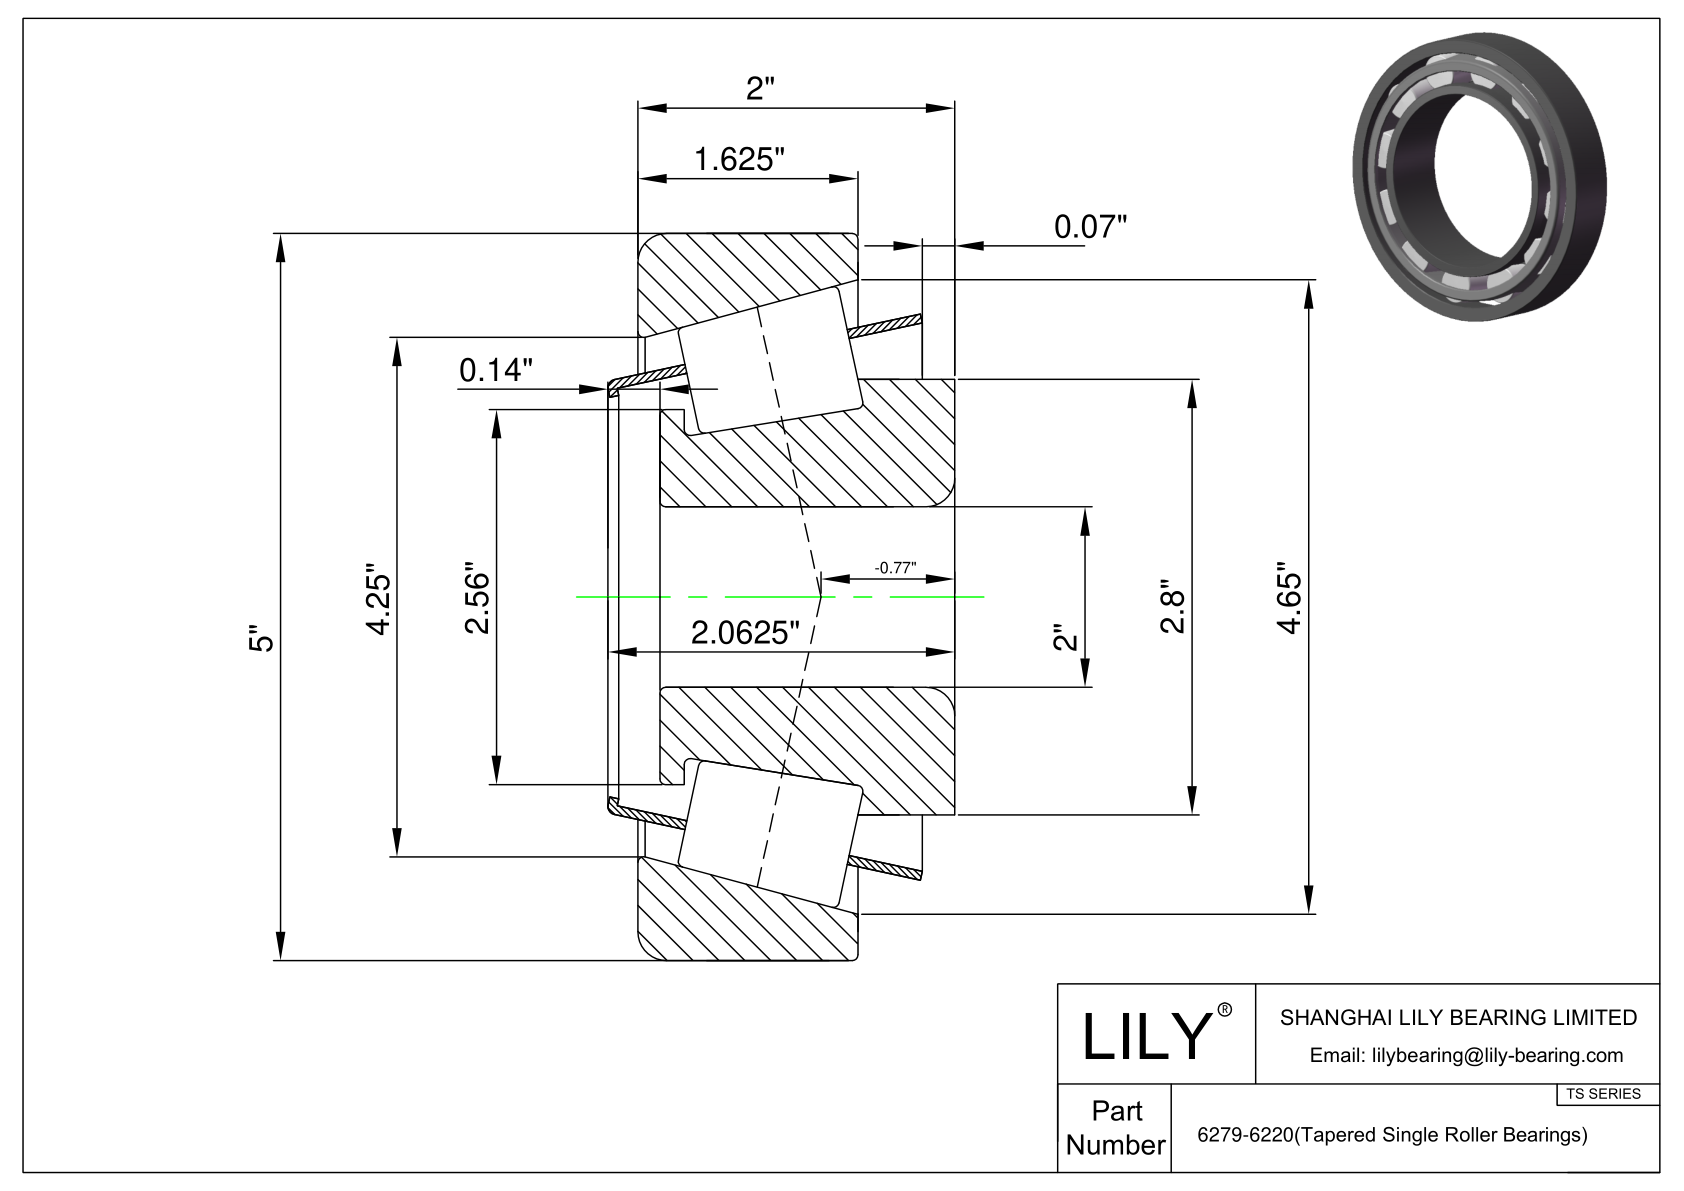 6279-6220 TS (Tapered Single Roller Bearings) (Imperial) cad drawing